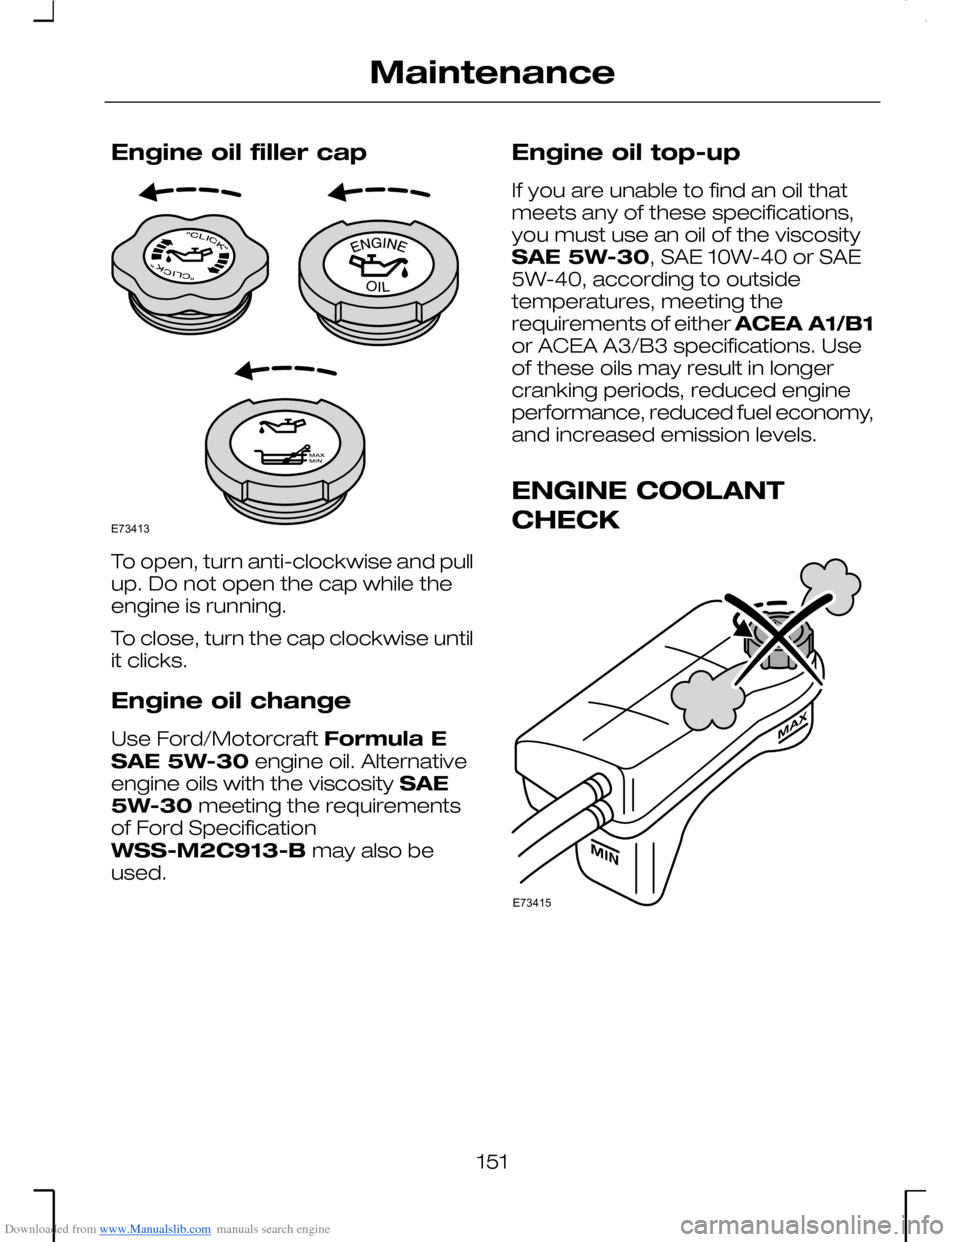 FORD MONDEO 2006 2.G Owners Manual Downloaded from www.Manualslib.com manuals search engine Engine oil filler cap
To open, turn anti-clockwise and pullup. Do not open the cap while theengine is running.
To close, turn the cap clockwise